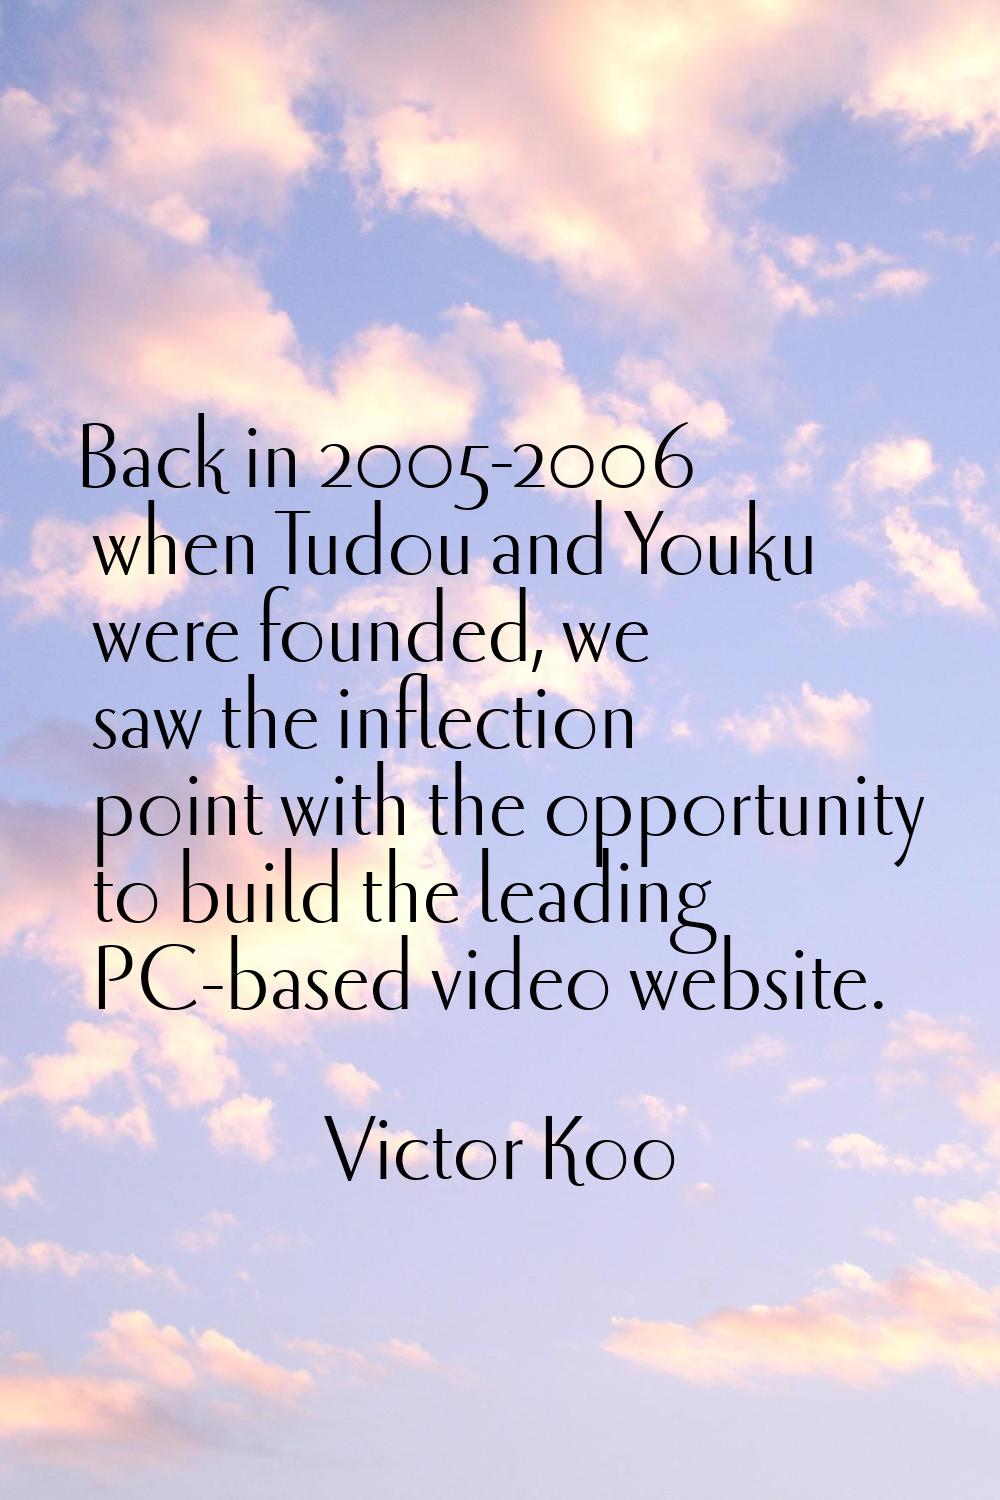 Back in 2005-2006 when Tudou and Youku were founded, we saw the inflection point with the opportuni